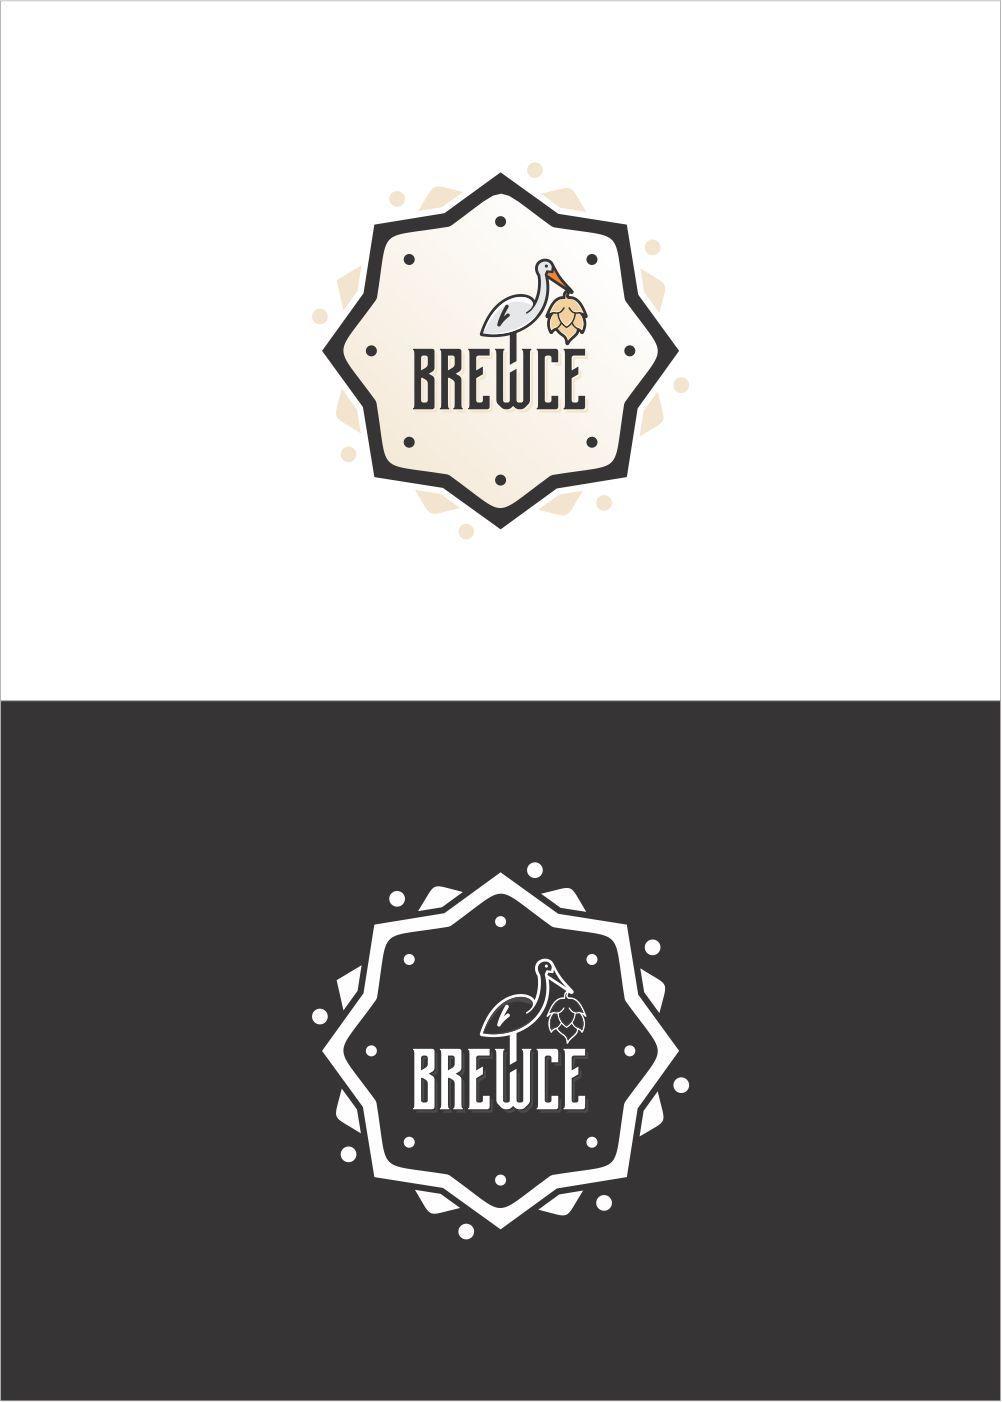 Baby DG Logo - Modern, Masculine, Brewery Logo Design for A Baby Named Brewce by DG ...